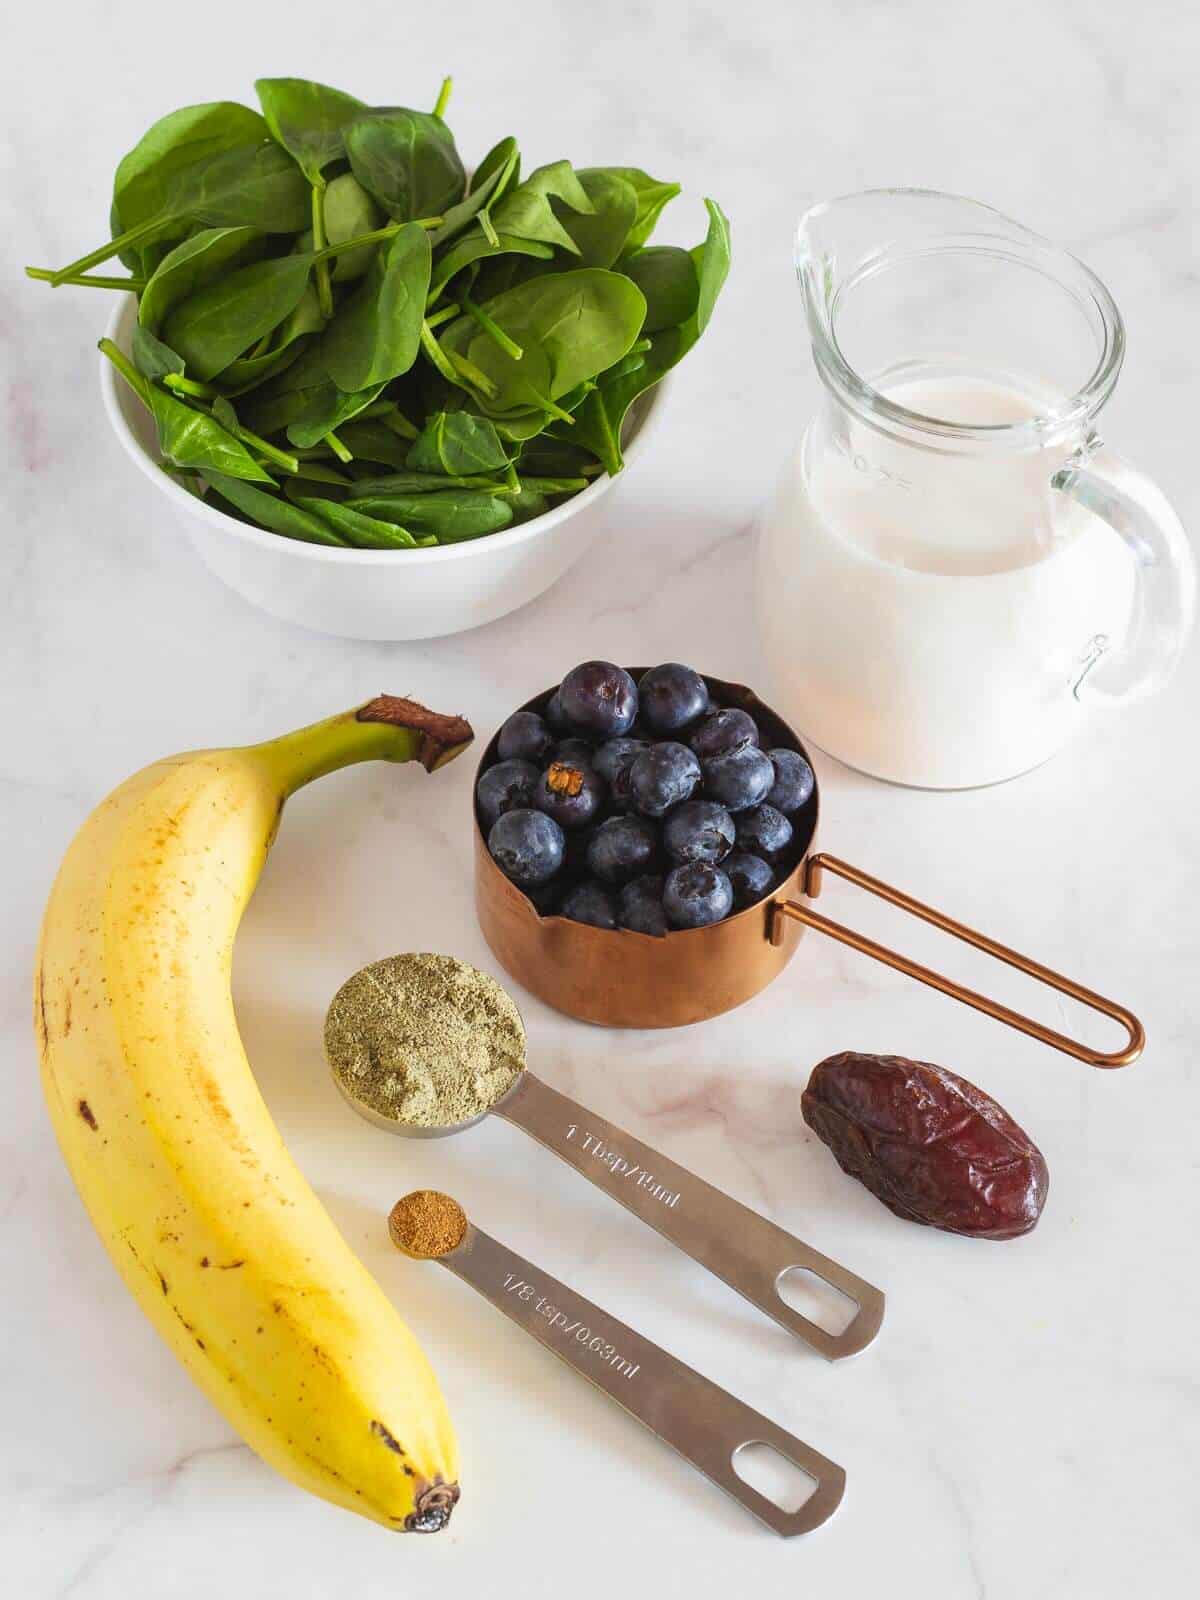 Spinach Blueberry Banana Smoothie ingredients